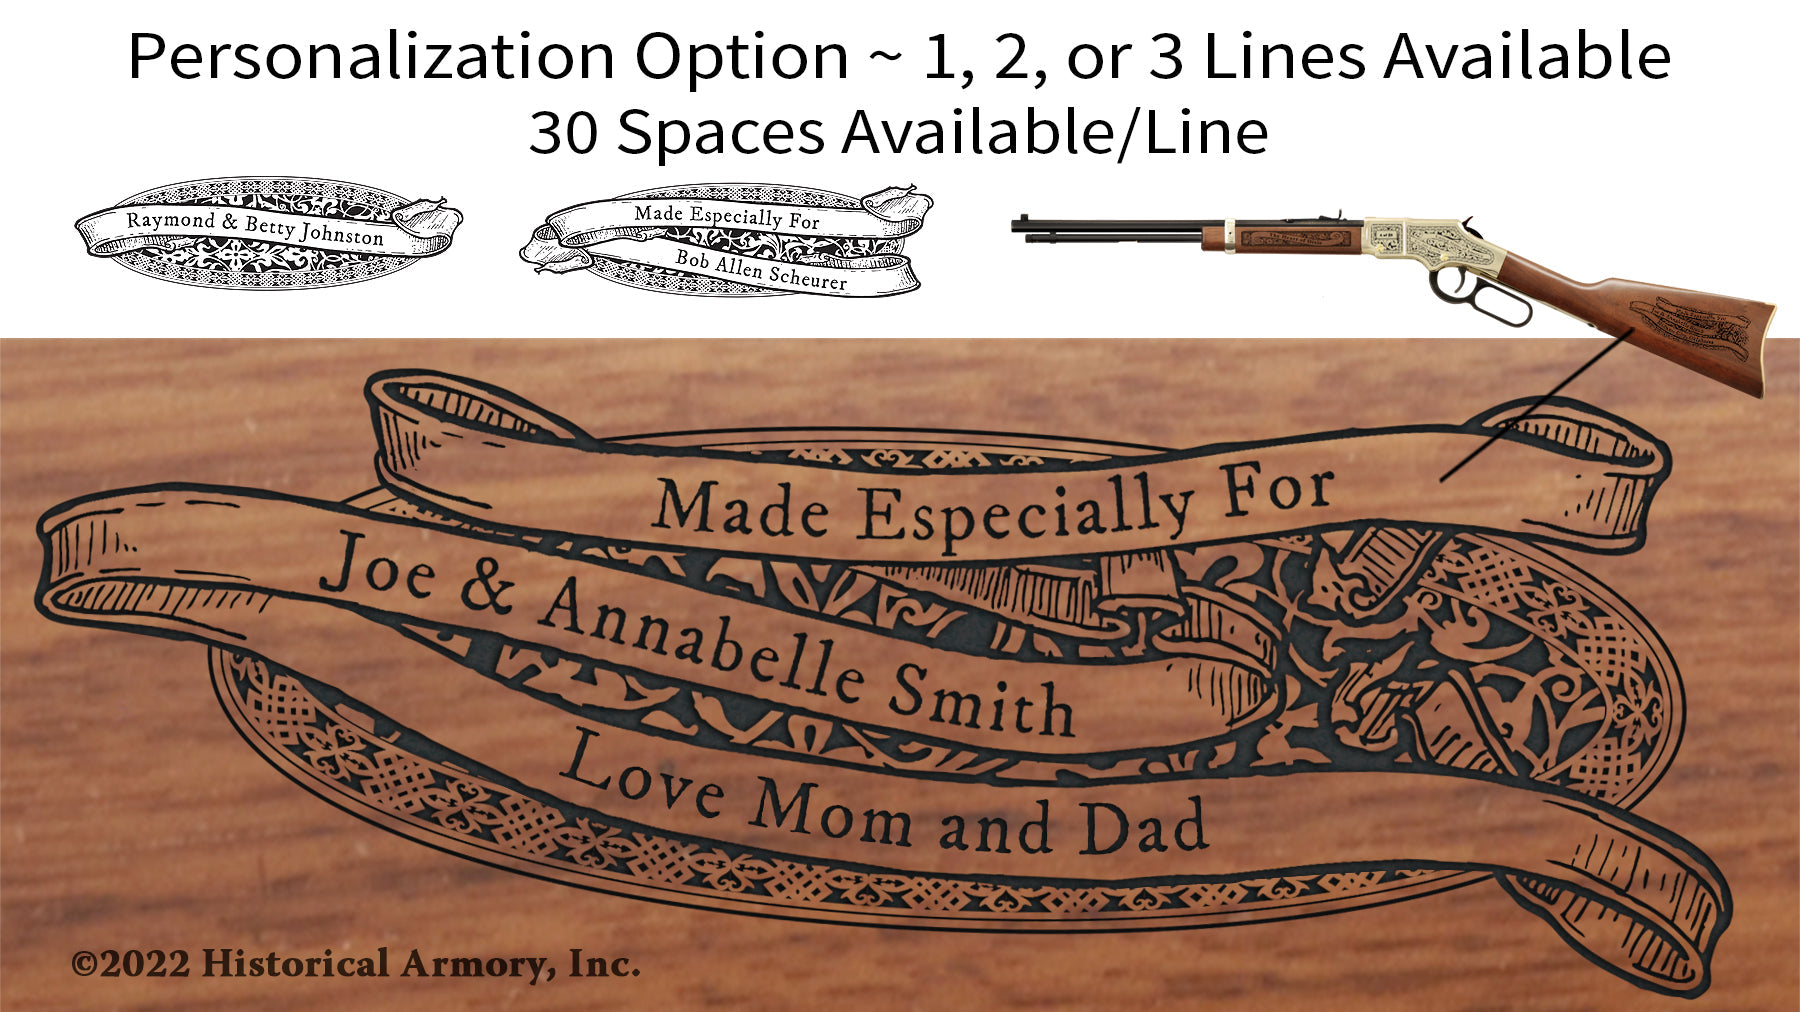 New York State Pride Engraved Rifle Personalization